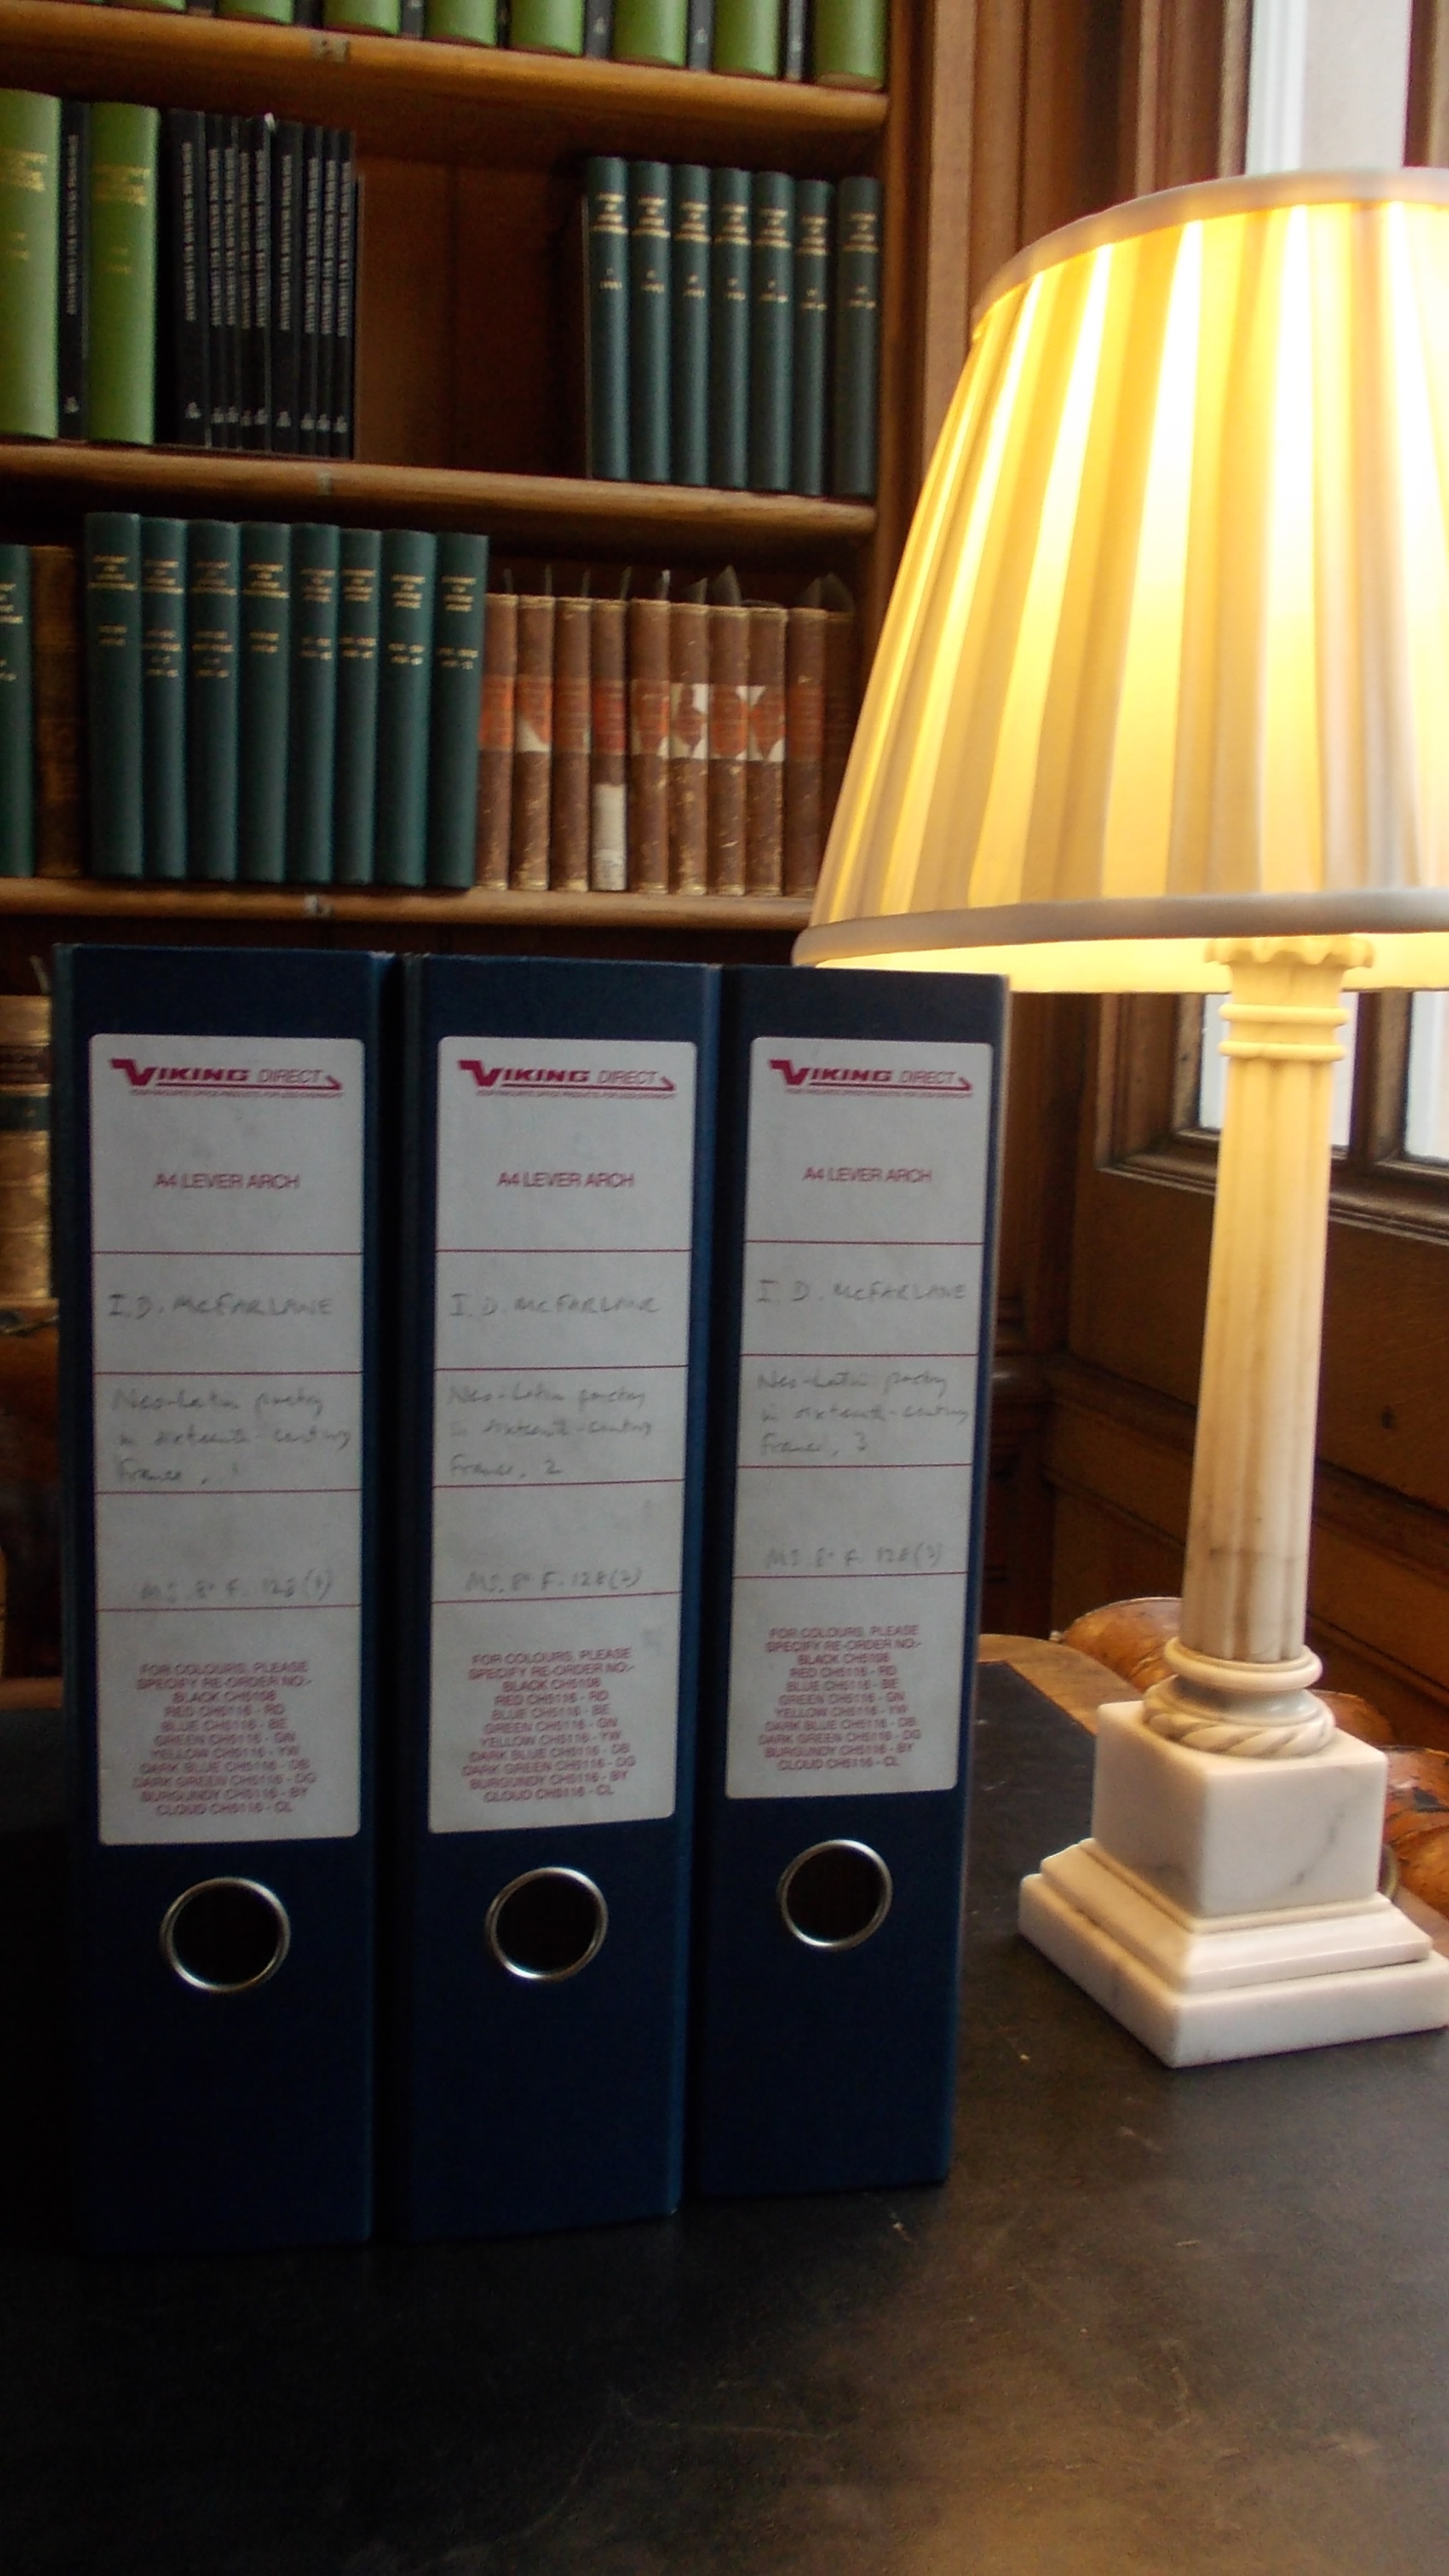 The McFarlane typescript in the Taylorian Institution Library (Oxford)